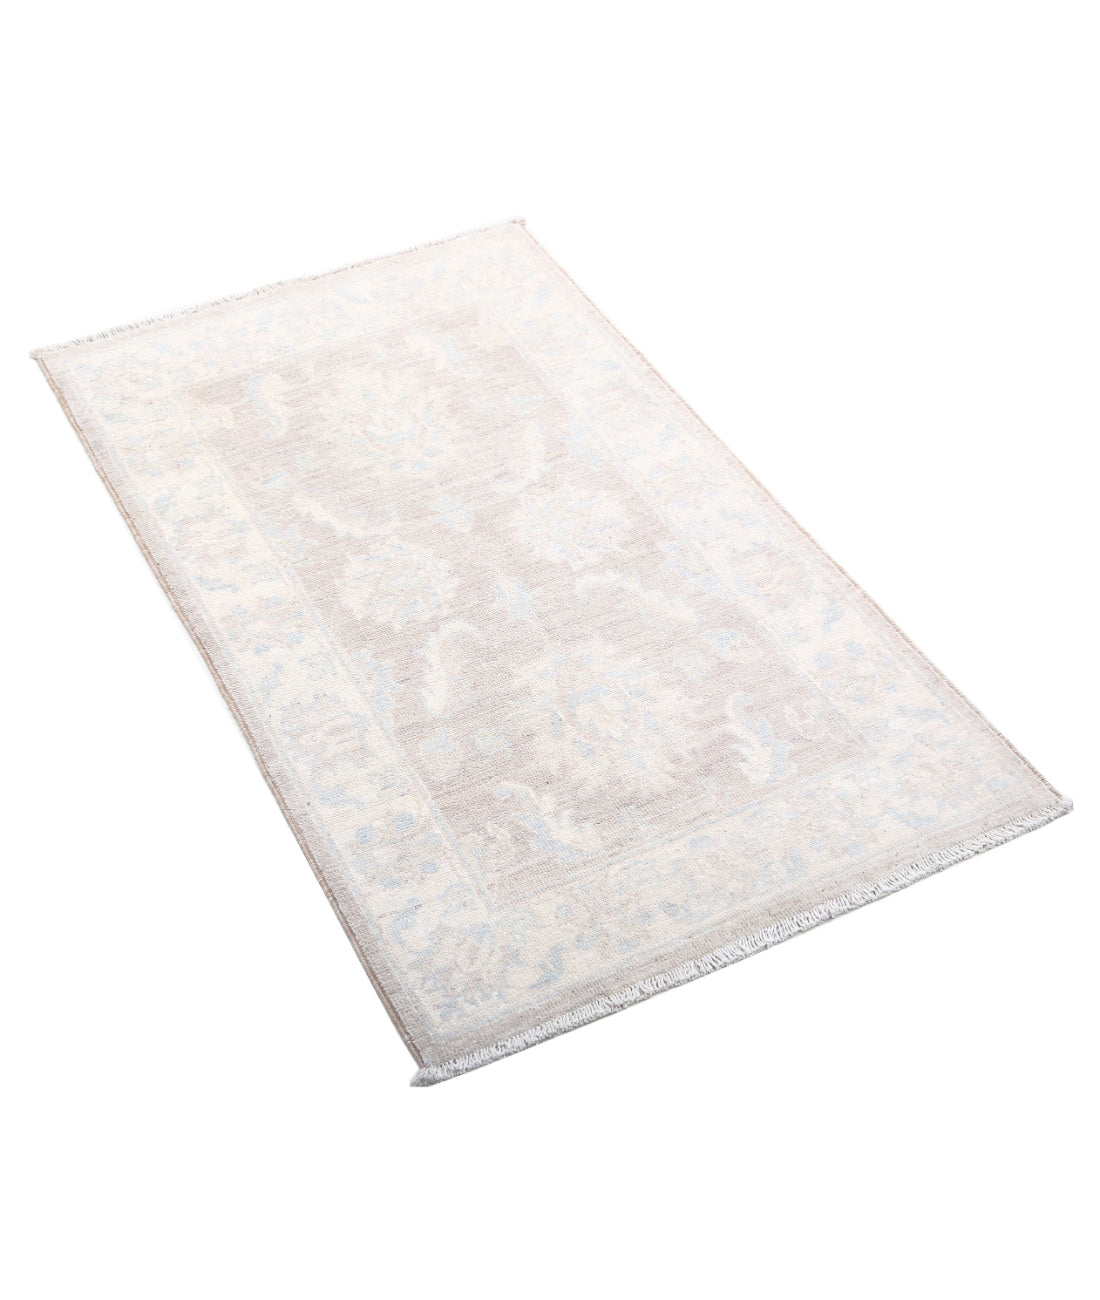 Hand Knotted Serenity Wool Rug - 2'0'' x 3'4'' 2'0'' x 3'4'' (60 X 100) / Brown / Ivory